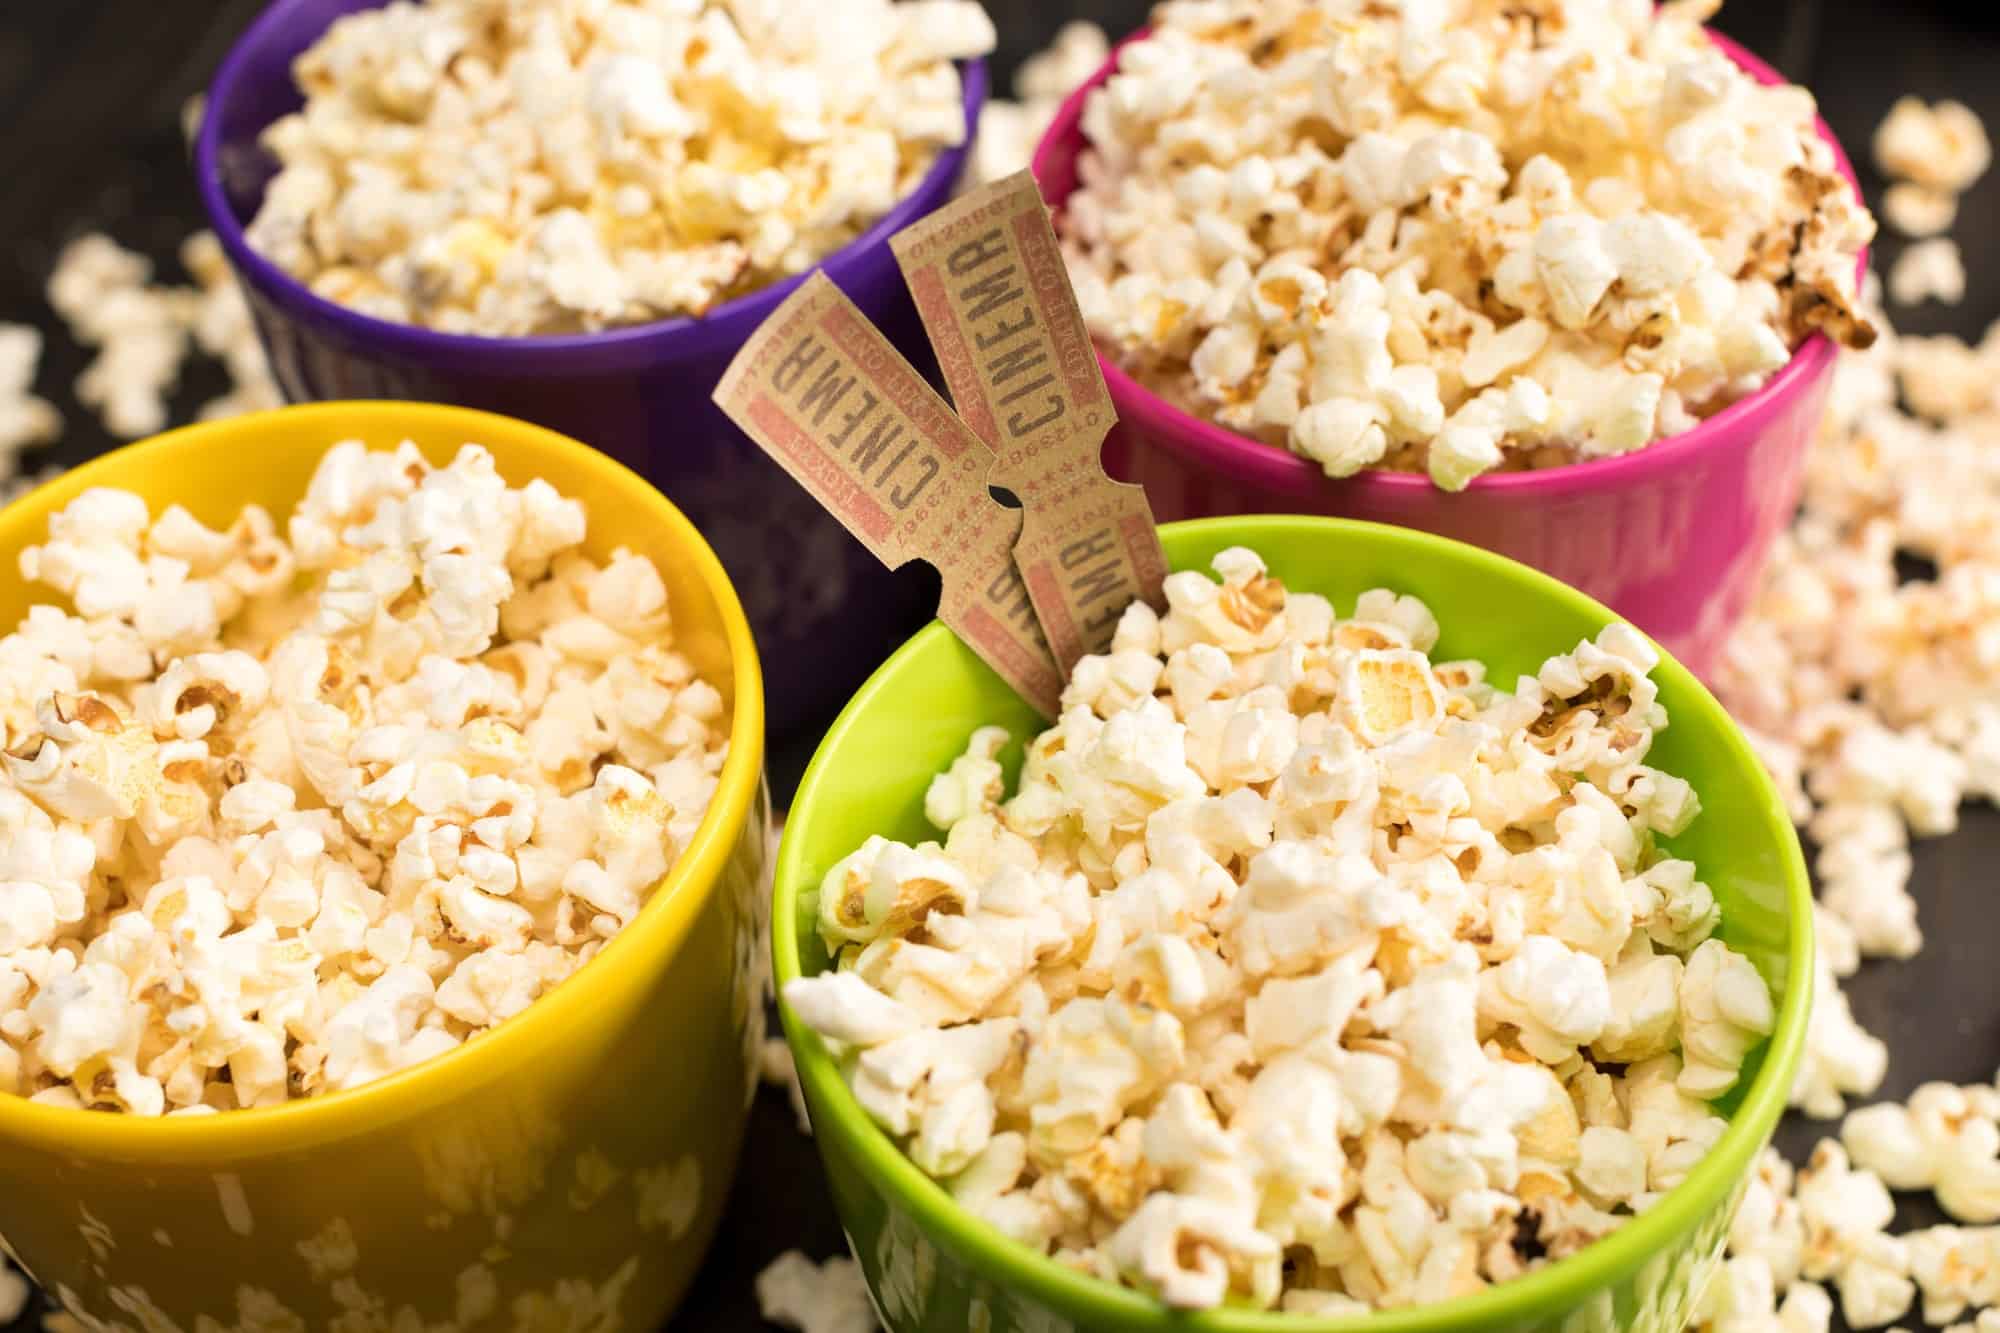 making homemade popcorn in an inexpensive air popper is fast and much healthier than microwave popcorn. Get our recipe and more helpful tips at Made in a Pinch and follow us on Pinterest!1